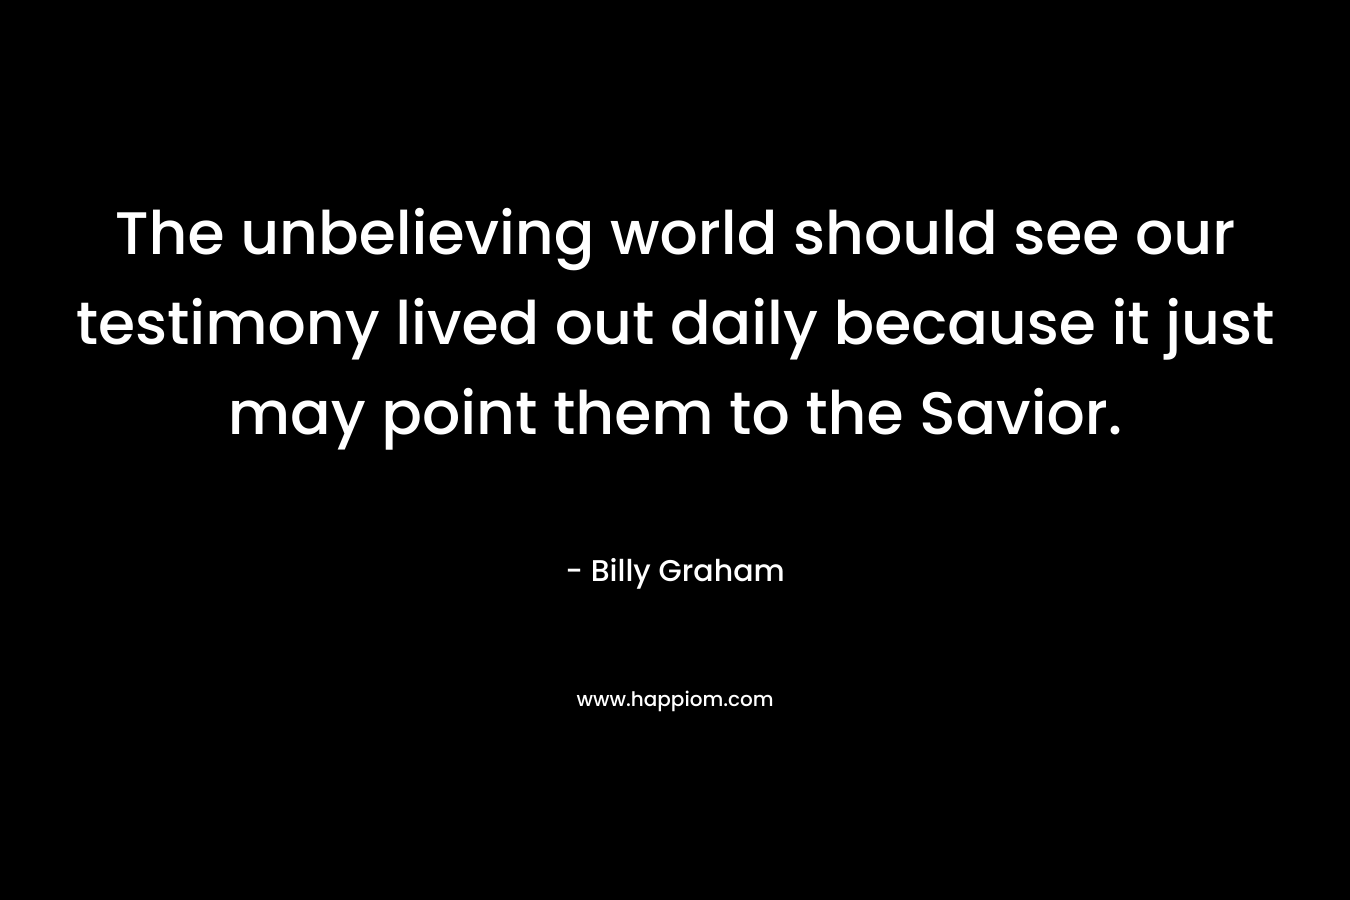 The unbelieving world should see our testimony lived out daily because it just may point them to the Savior.